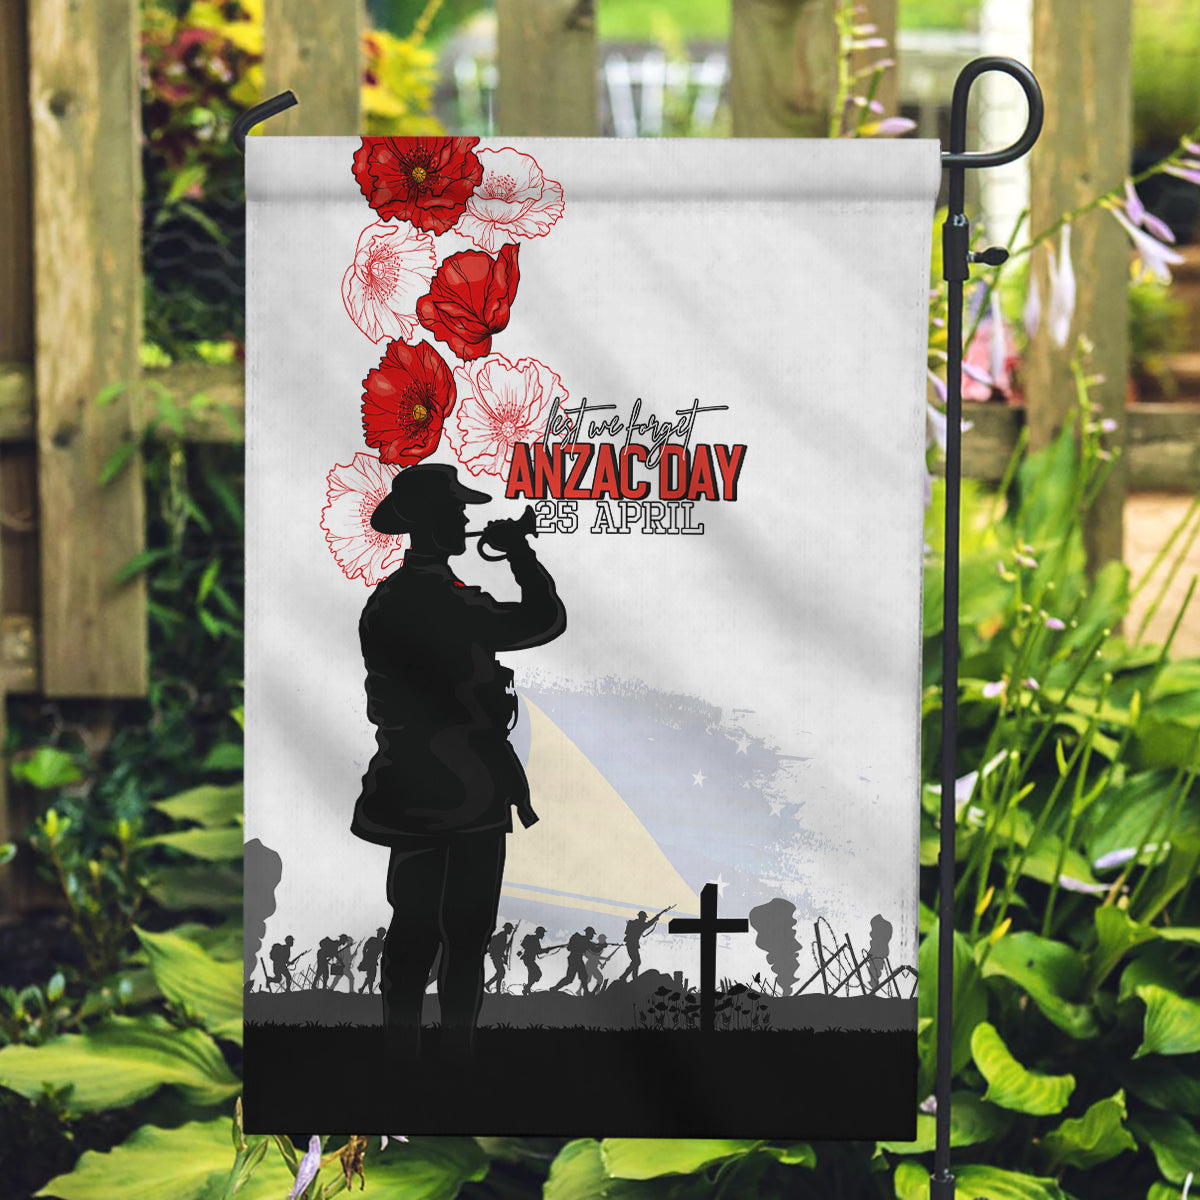 Tokelau ANZAC Day Garden Flag Lest We Forget Red Poppy Flowers and Soldier LT03 Garden Flag White - Polynesian Pride